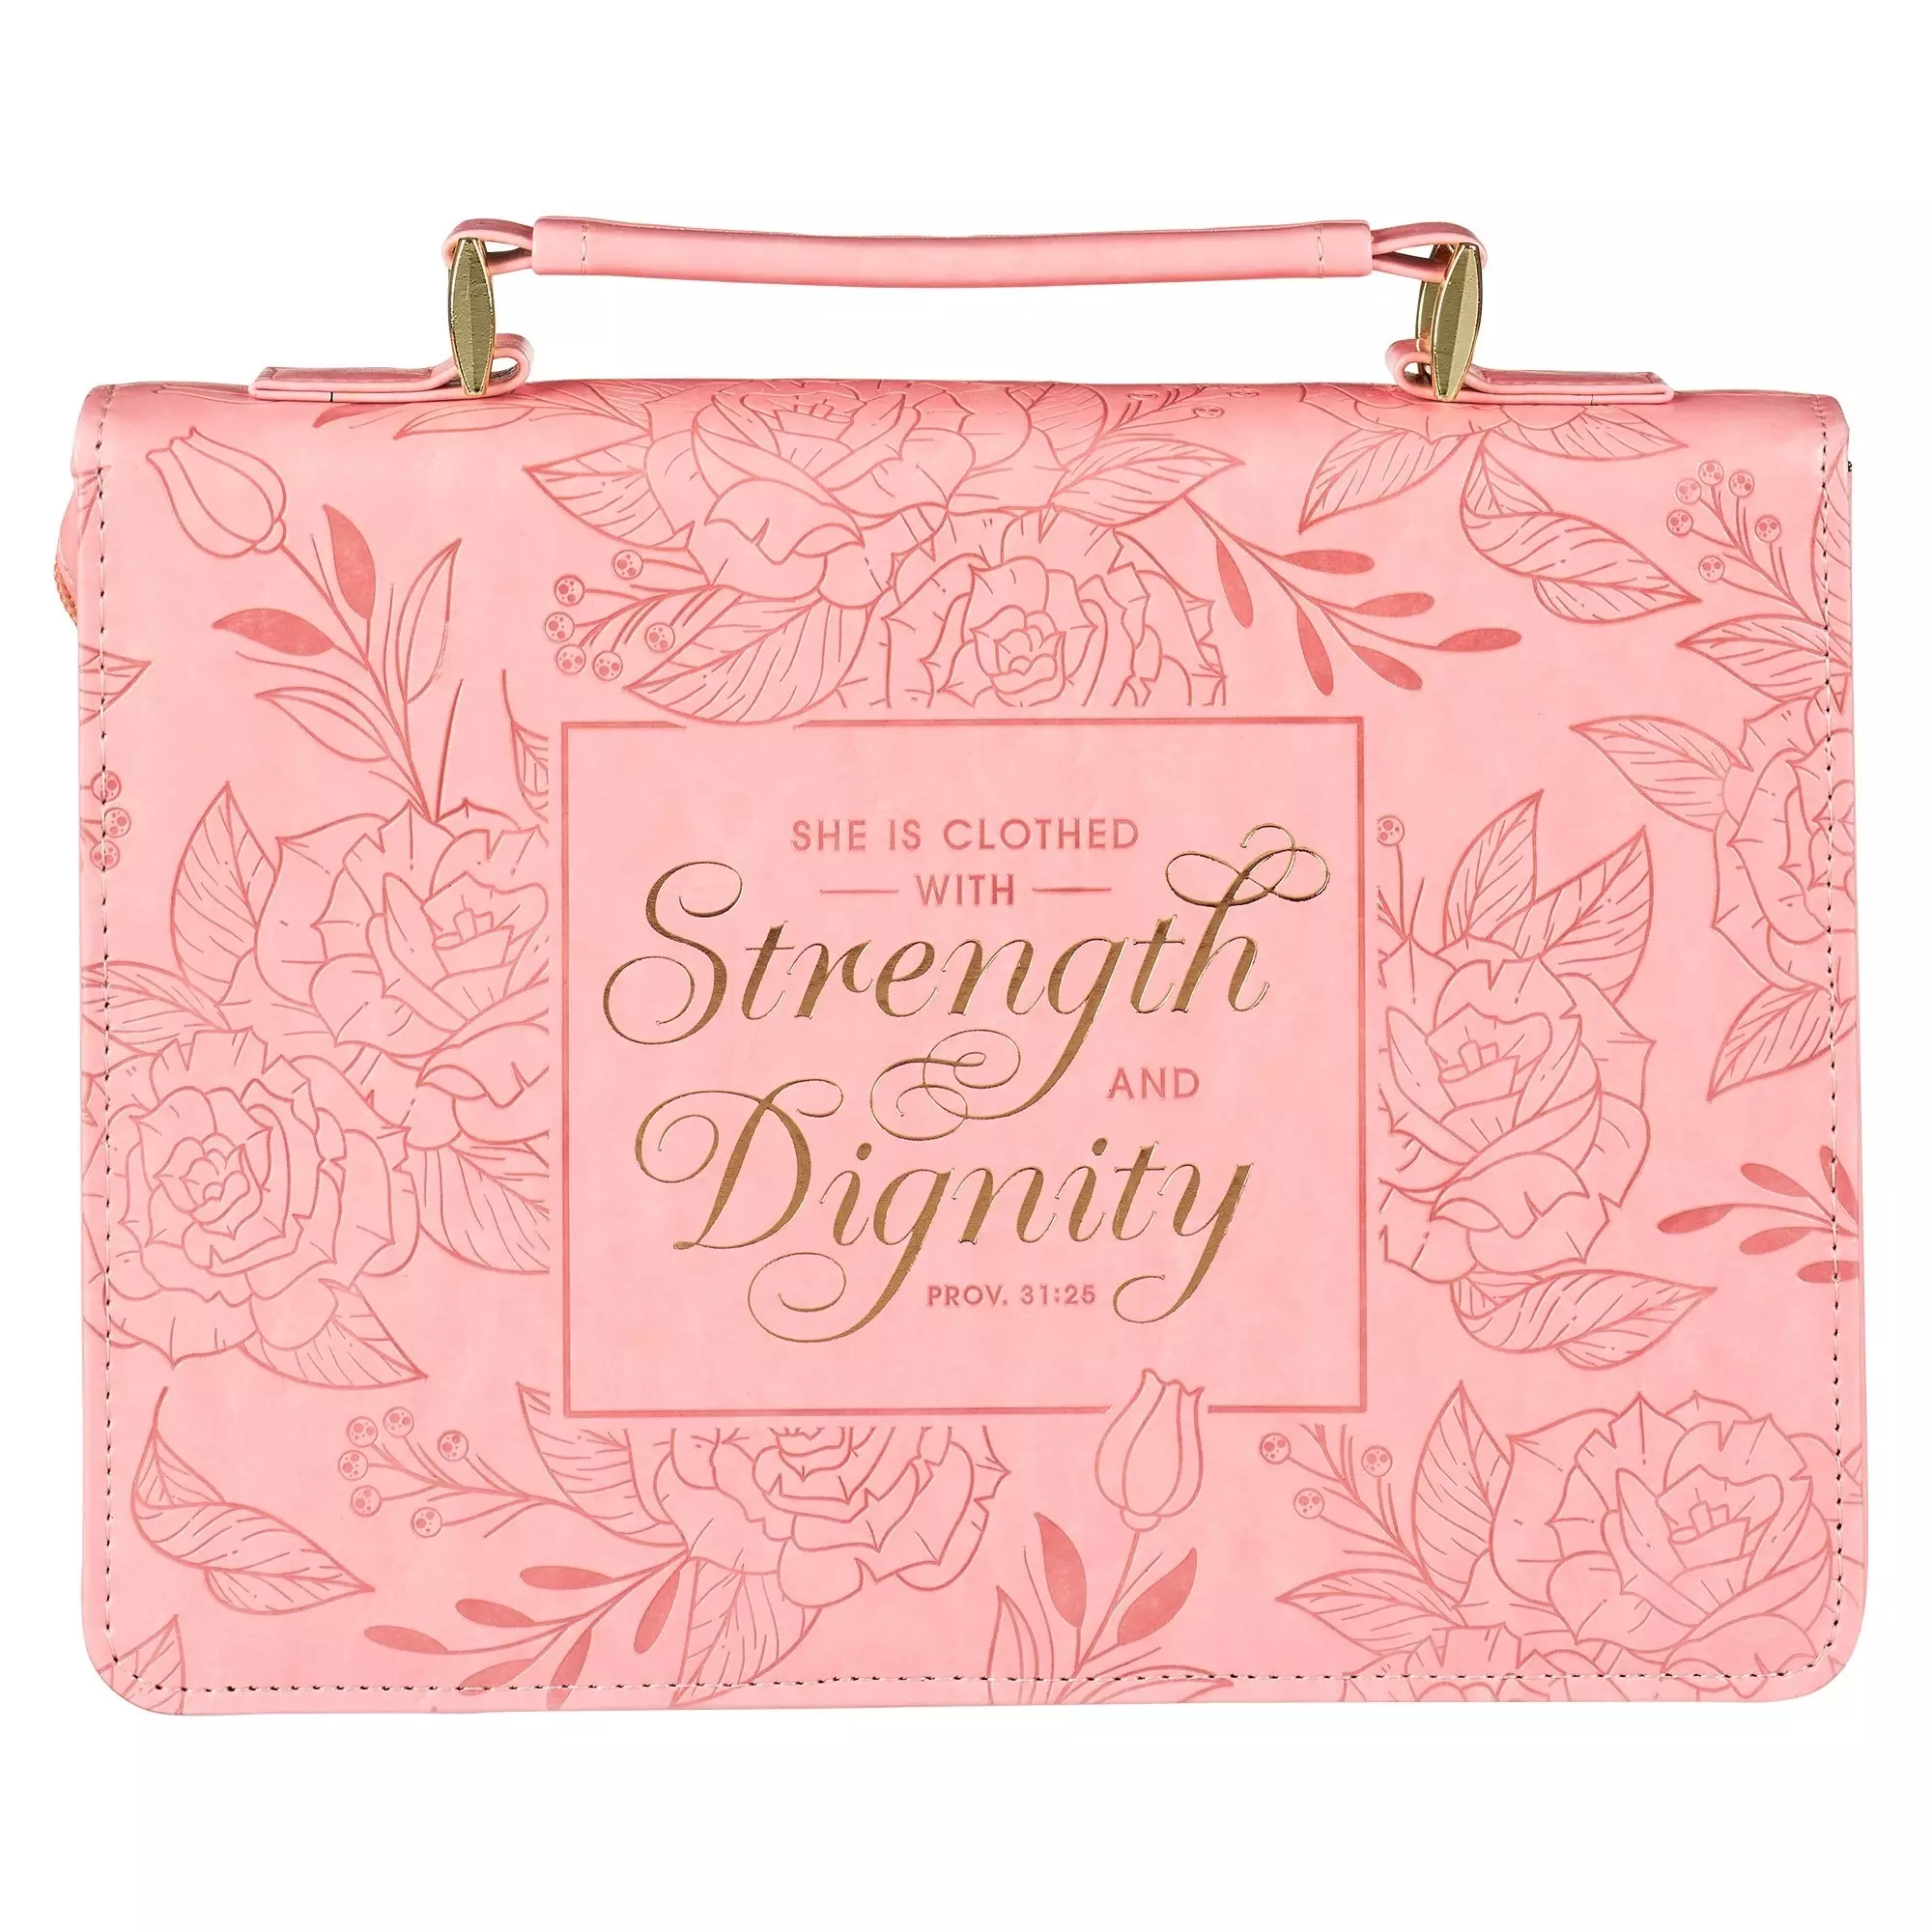 Medium Strength & Dignity Pink Floral Fashion Bible Cover - Prov. 31:25